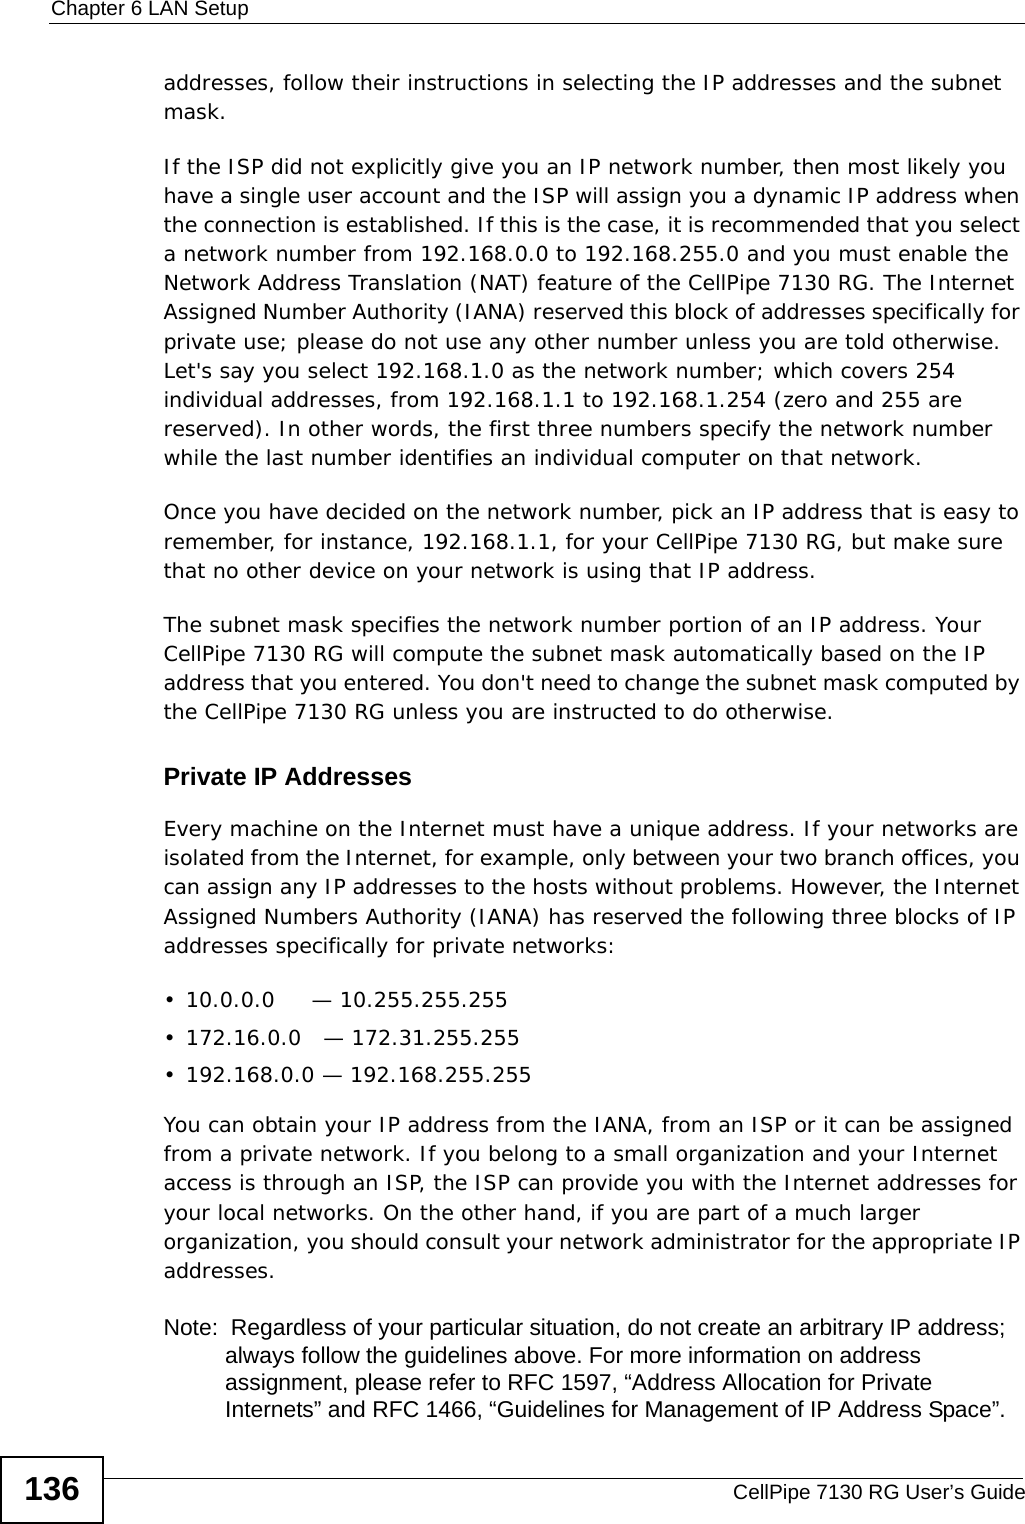 Chapter 6 LAN SetupCellPipe 7130 RG User’s Guide136addresses, follow their instructions in selecting the IP addresses and the subnet mask.If the ISP did not explicitly give you an IP network number, then most likely you have a single user account and the ISP will assign you a dynamic IP address when the connection is established. If this is the case, it is recommended that you select a network number from 192.168.0.0 to 192.168.255.0 and you must enable the Network Address Translation (NAT) feature of the CellPipe 7130 RG. The Internet Assigned Number Authority (IANA) reserved this block of addresses specifically for private use; please do not use any other number unless you are told otherwise. Let&apos;s say you select 192.168.1.0 as the network number; which covers 254 individual addresses, from 192.168.1.1 to 192.168.1.254 (zero and 255 are reserved). In other words, the first three numbers specify the network number while the last number identifies an individual computer on that network.Once you have decided on the network number, pick an IP address that is easy to remember, for instance, 192.168.1.1, for your CellPipe 7130 RG, but make sure that no other device on your network is using that IP address.The subnet mask specifies the network number portion of an IP address. Your CellPipe 7130 RG will compute the subnet mask automatically based on the IP address that you entered. You don&apos;t need to change the subnet mask computed by the CellPipe 7130 RG unless you are instructed to do otherwise.Private IP AddressesEvery machine on the Internet must have a unique address. If your networks are isolated from the Internet, for example, only between your two branch offices, you can assign any IP addresses to the hosts without problems. However, the Internet Assigned Numbers Authority (IANA) has reserved the following three blocks of IP addresses specifically for private networks:• 10.0.0.0     — 10.255.255.255• 172.16.0.0   — 172.31.255.255• 192.168.0.0 — 192.168.255.255You can obtain your IP address from the IANA, from an ISP or it can be assigned from a private network. If you belong to a small organization and your Internet access is through an ISP, the ISP can provide you with the Internet addresses for your local networks. On the other hand, if you are part of a much larger organization, you should consult your network administrator for the appropriate IP addresses.Note:  Regardless of your particular situation, do not create an arbitrary IP address; always follow the guidelines above. For more information on address assignment, please refer to RFC 1597, “Address Allocation for Private Internets” and RFC 1466, “Guidelines for Management of IP Address Space”.